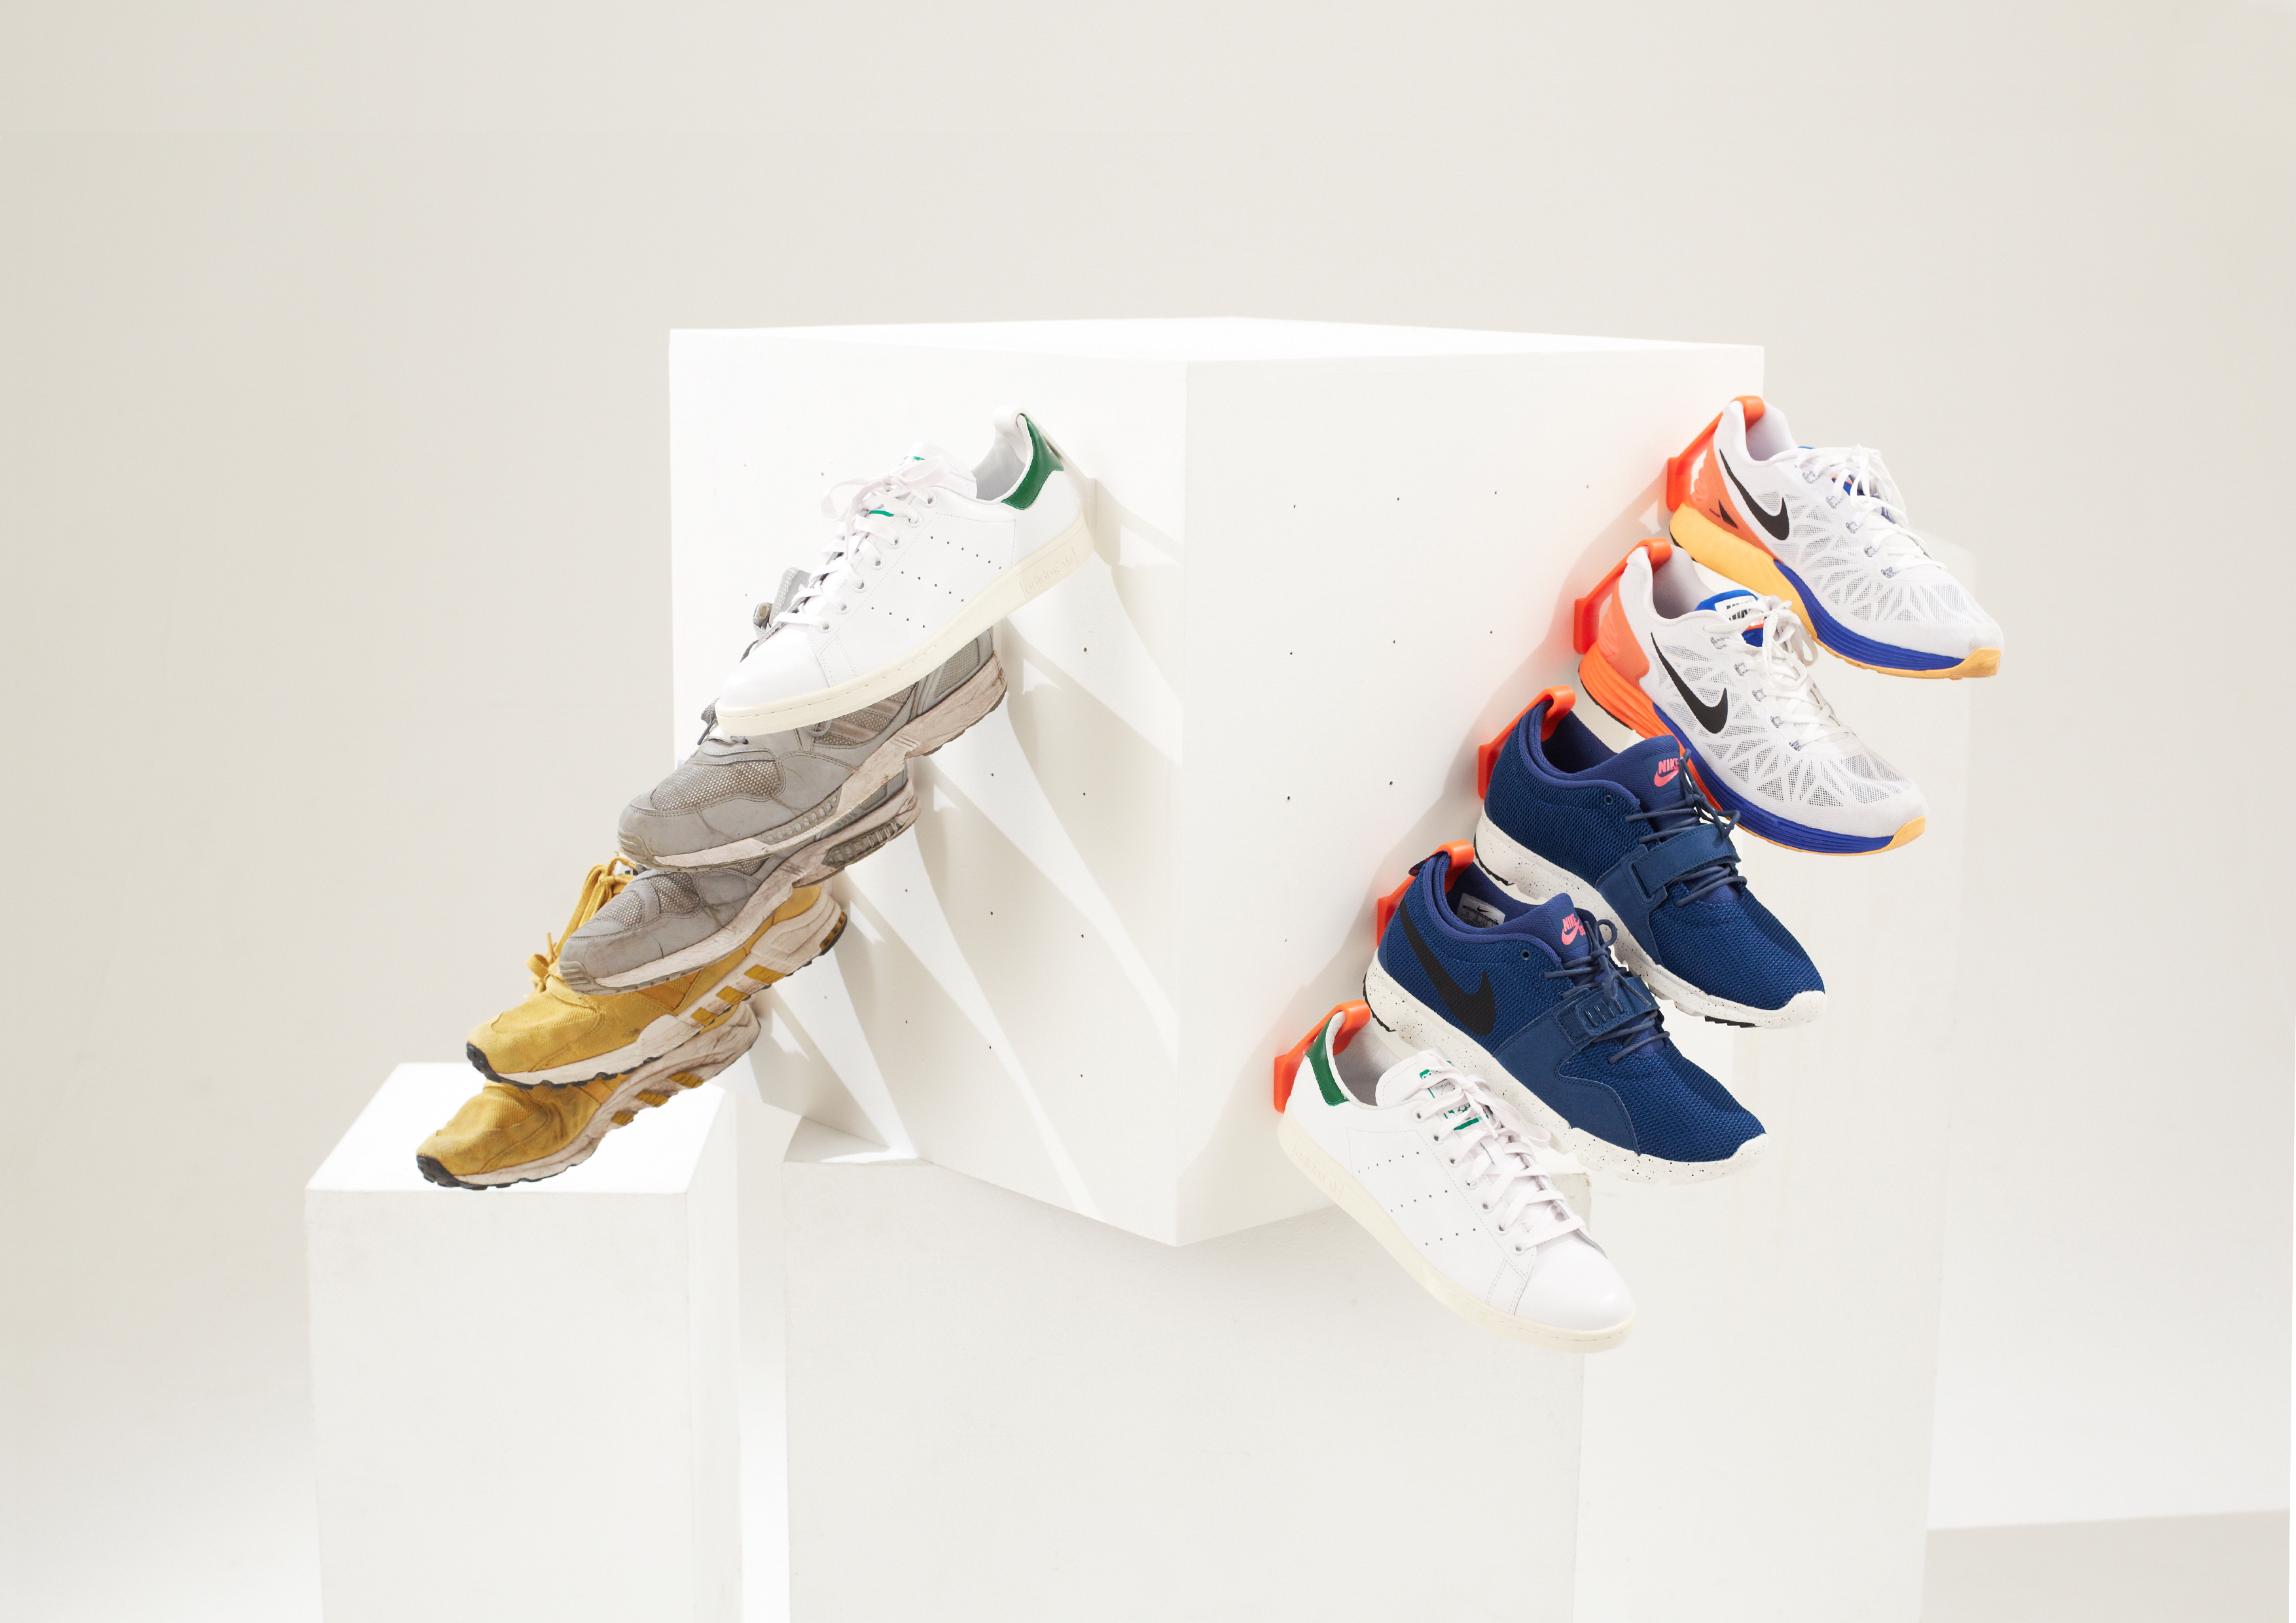 10 Staeckler shoe storage hooks are mounted to a white cube and hanging 5 pairs of sneakers.